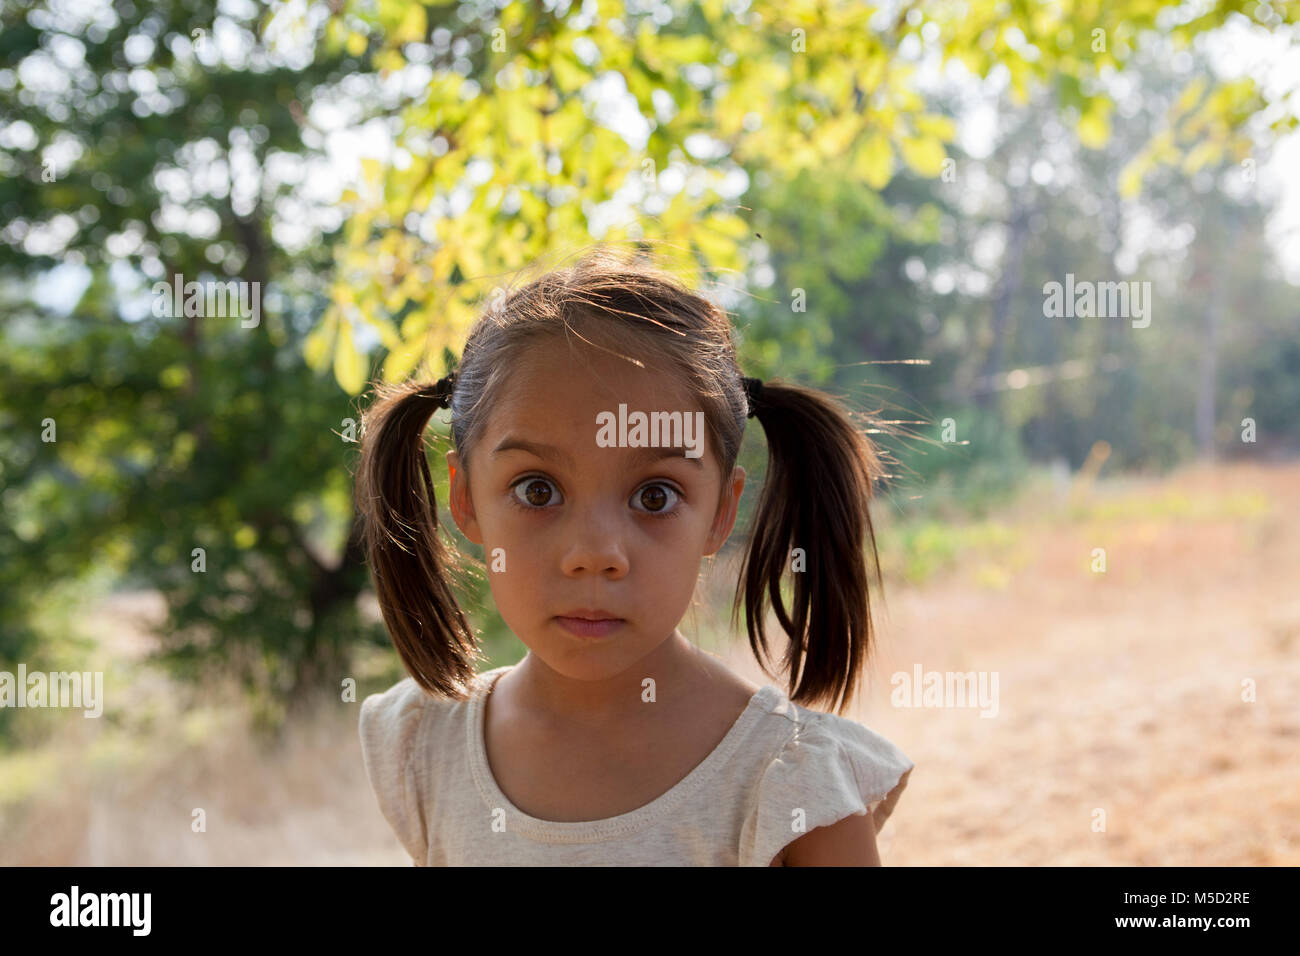 Portrait wide-eyed girl with pigtails in yard Stock Photo